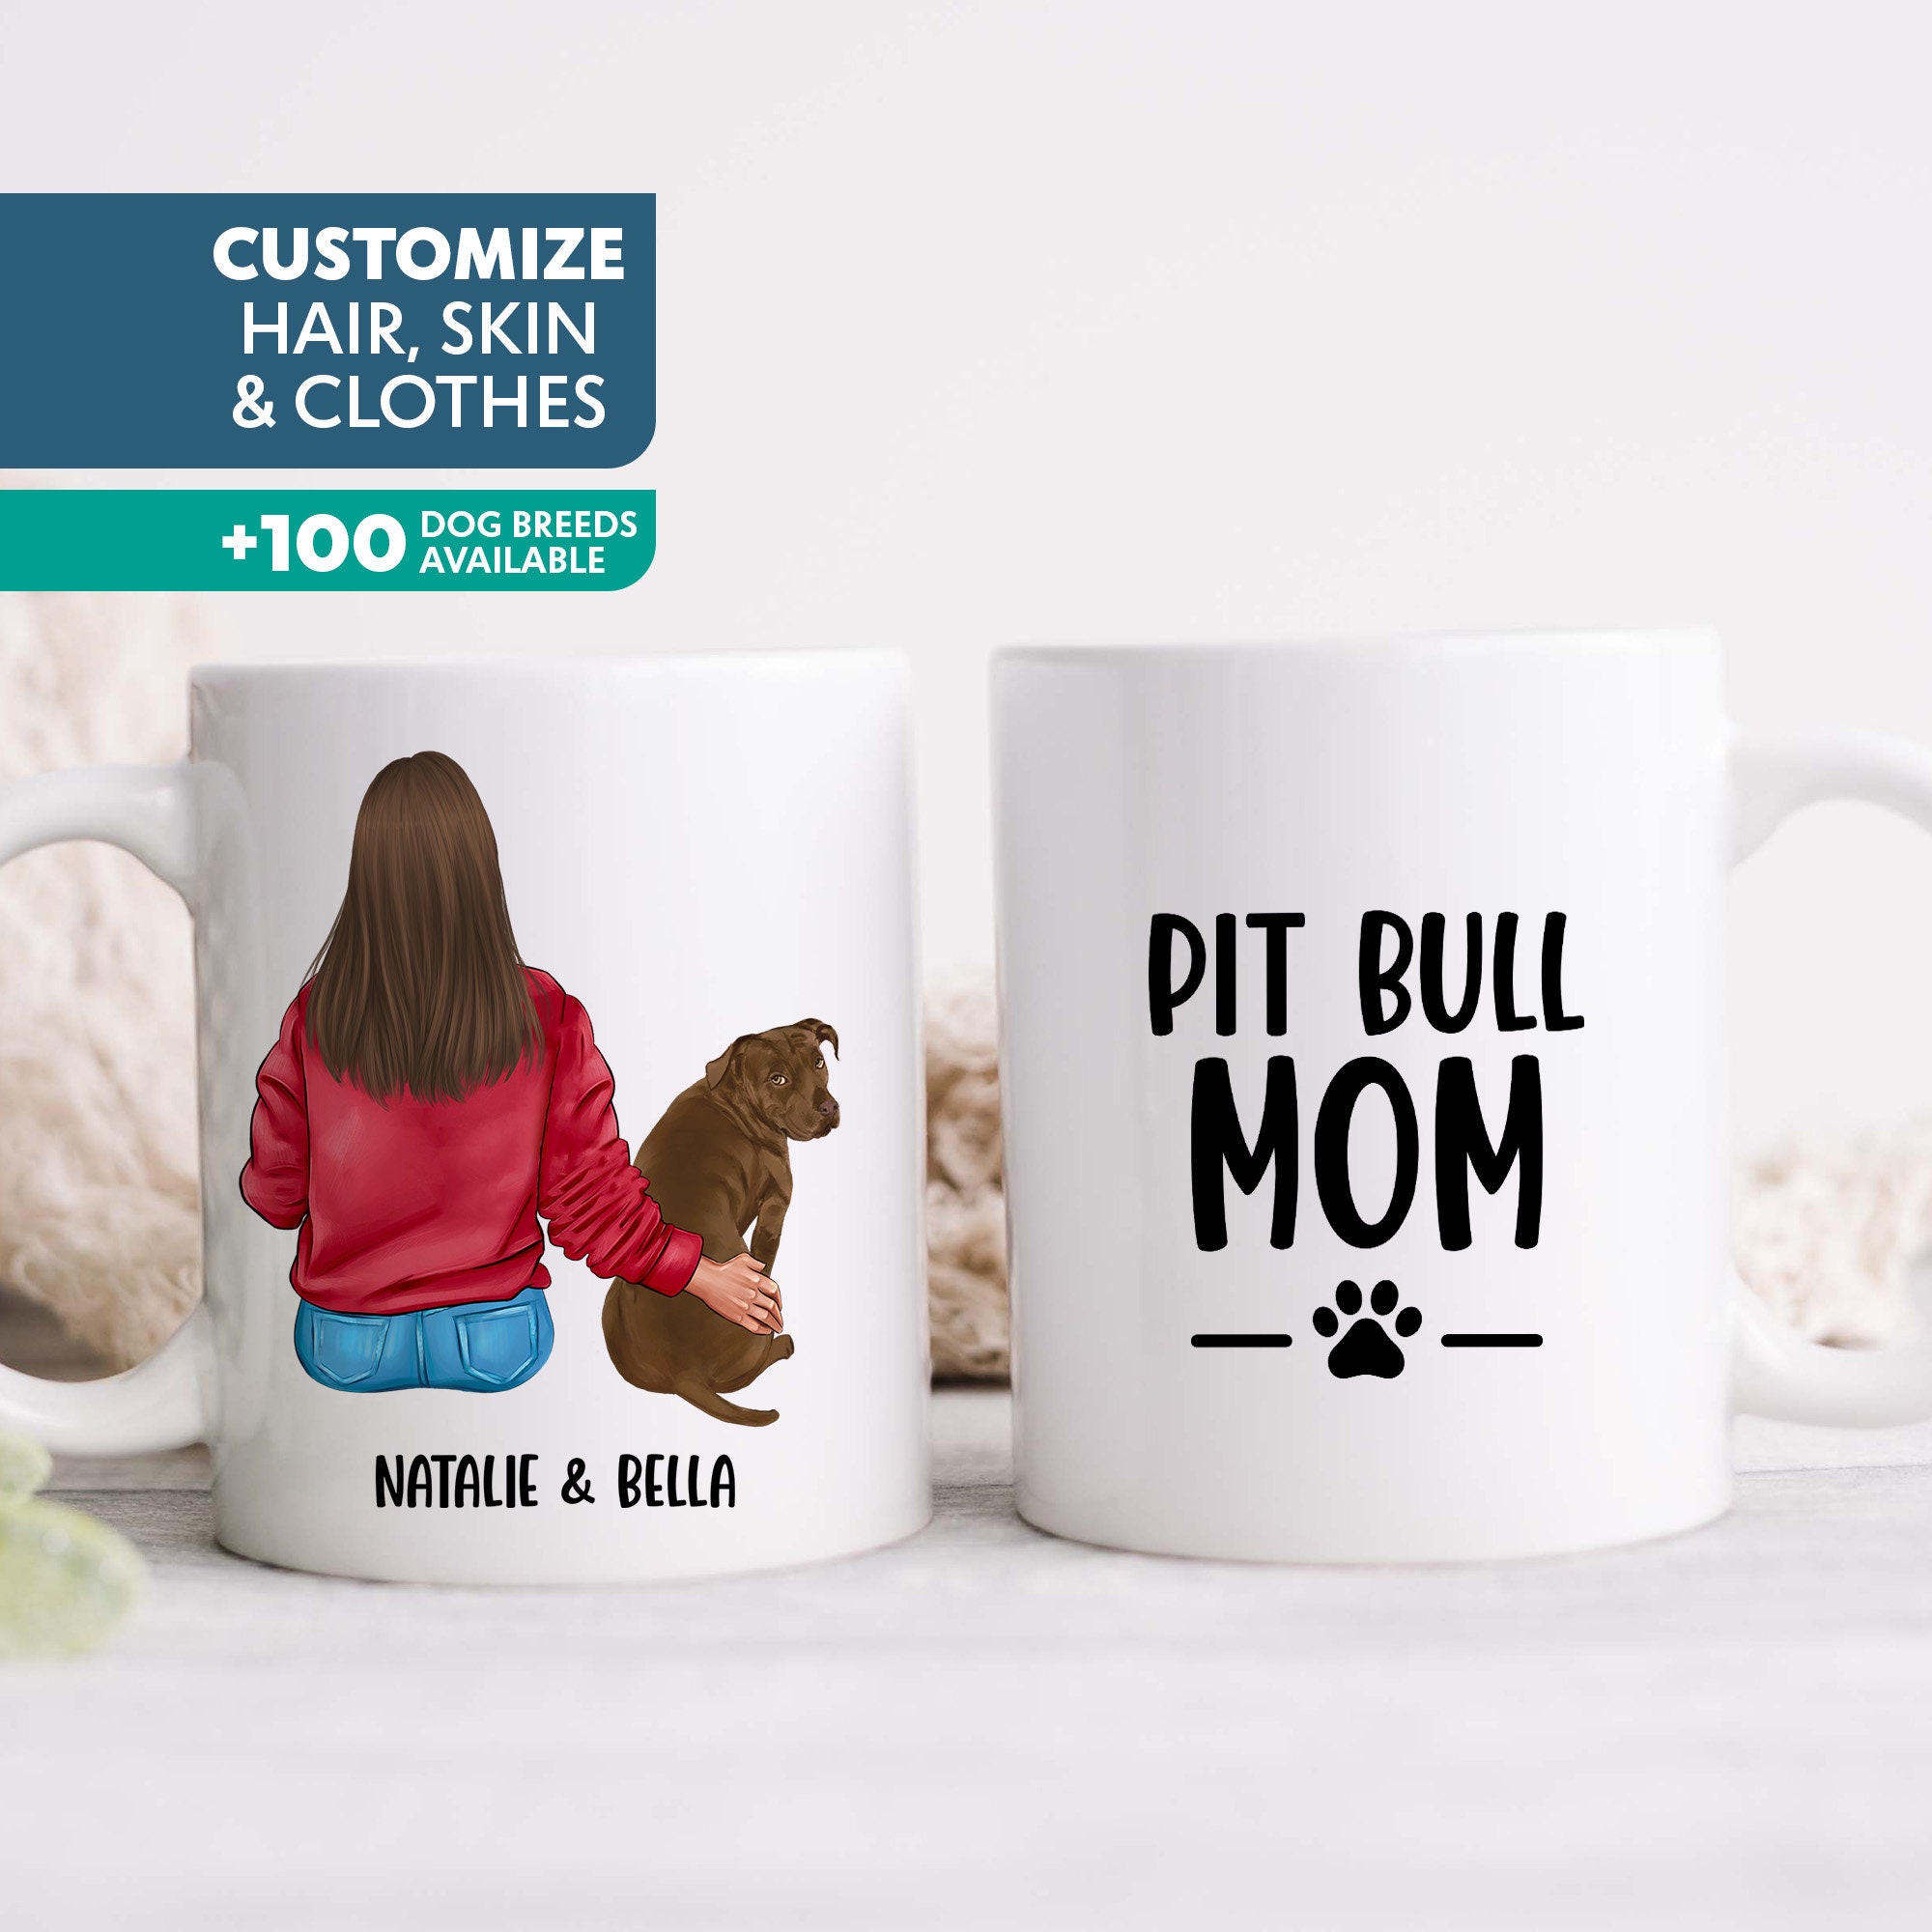 Embroly Personalized Pitbull Mom Shirt, Pit Bull Mama with Embroidered Collar Tee Dog Name, Pitbull Lover Gift Idea Black / L